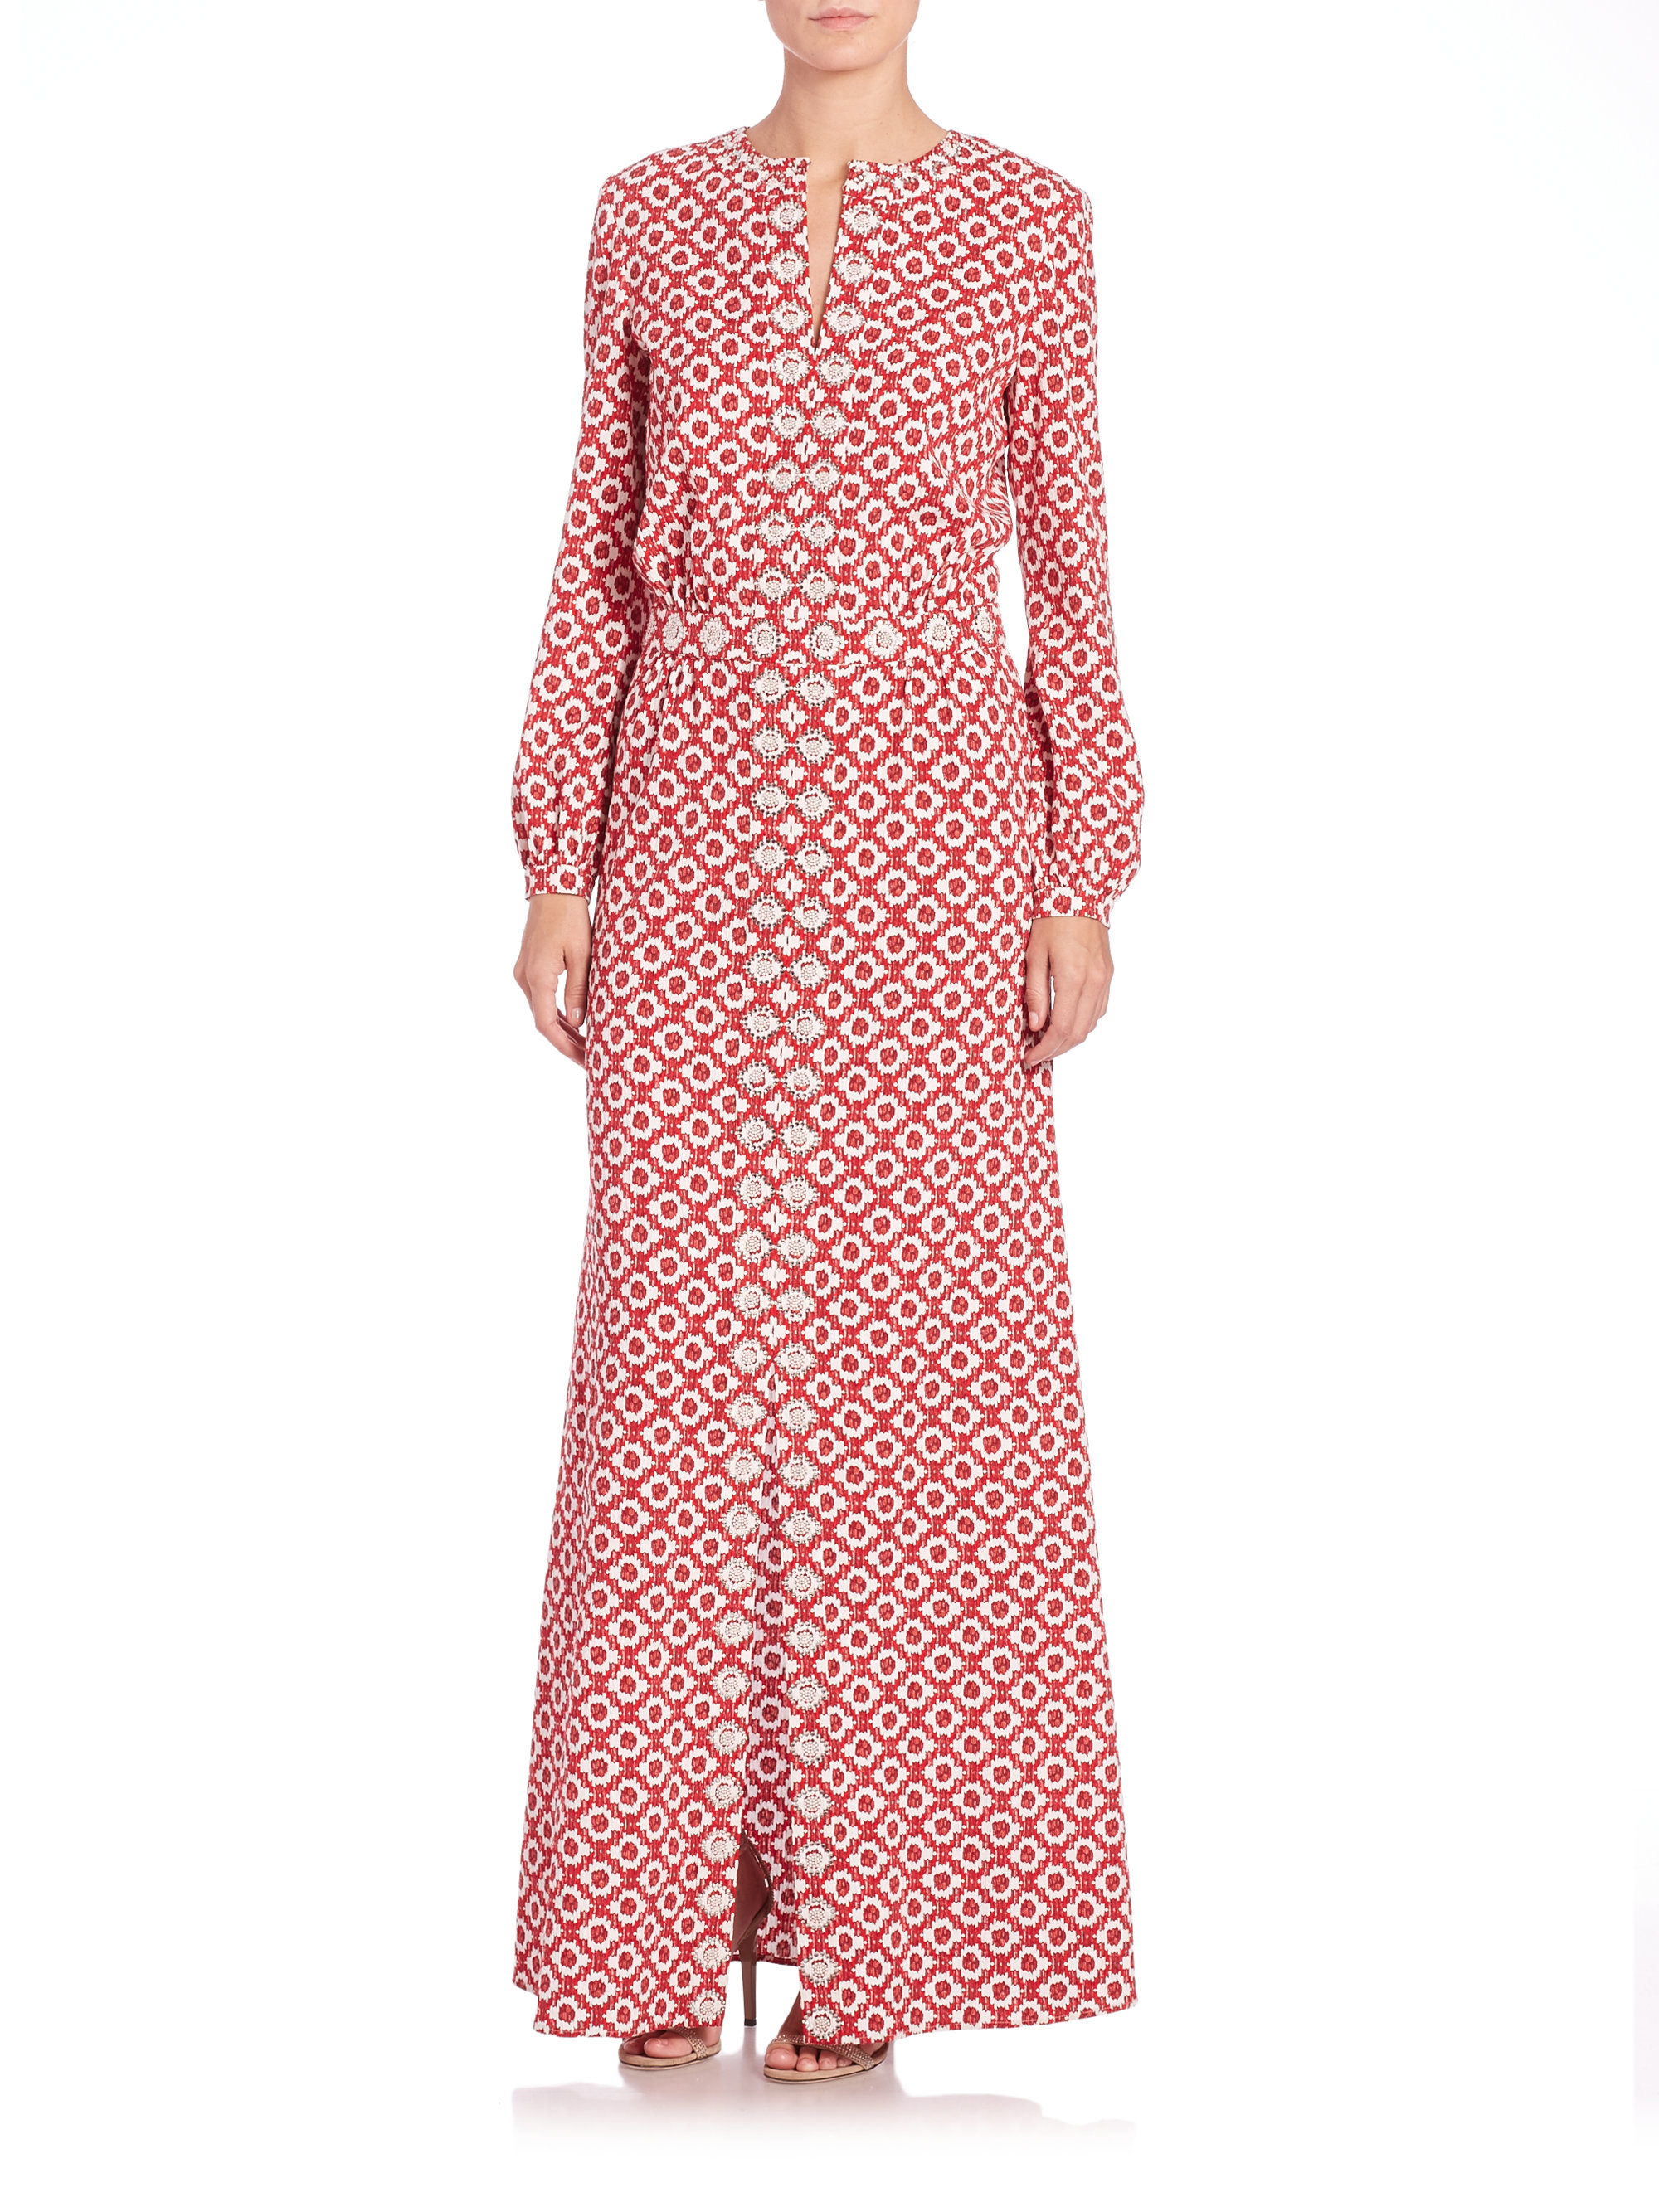 Tory Burch Silk & Cotton Embellished Caftan in Red | Lyst